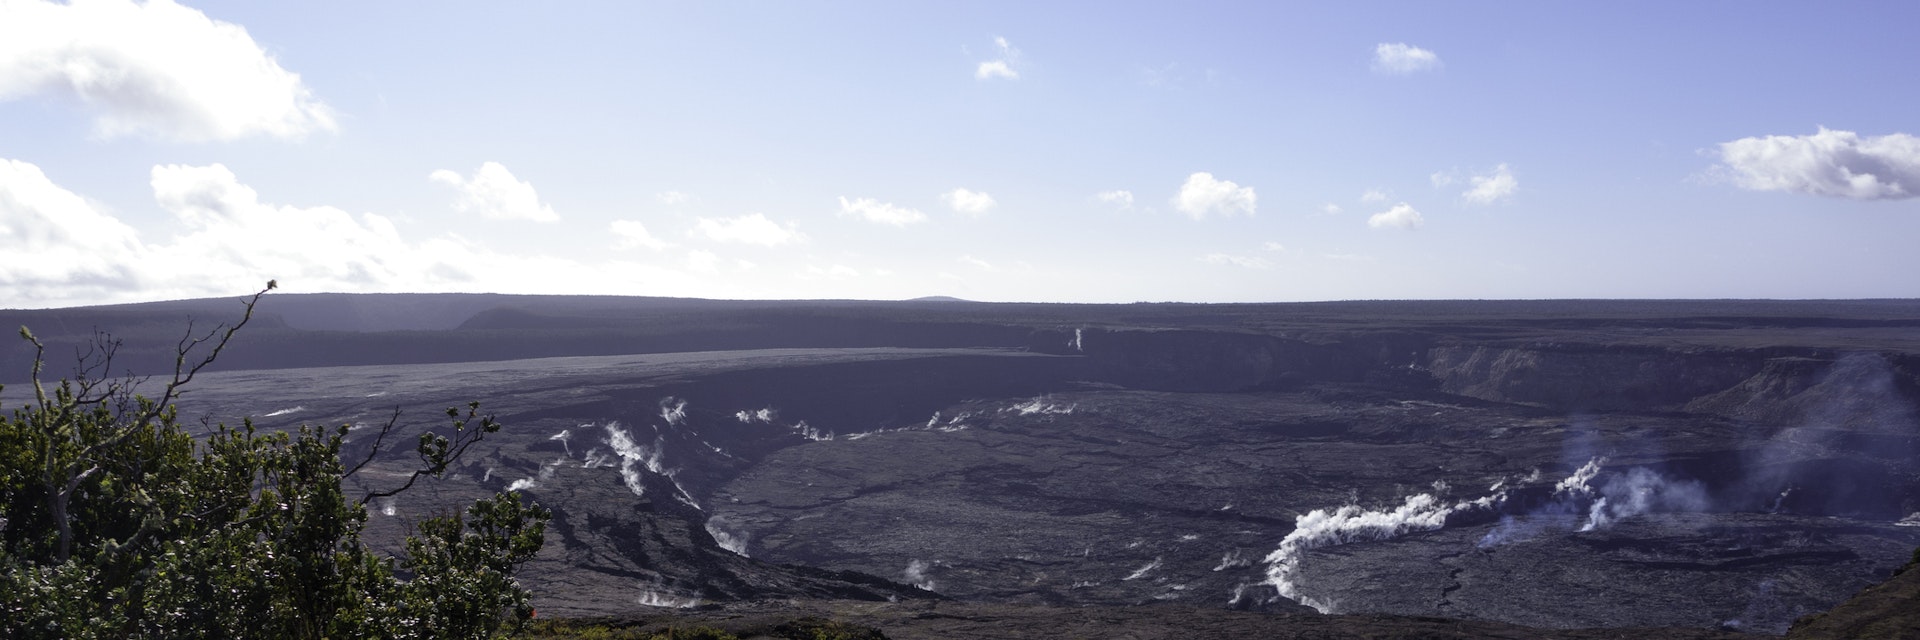 This is a shot of the Kilauea Volcano from the Kilauea Overlook in the Hawaii Volcanoes National Park, this is a panoramic shot of the caldera of the large Volcano on the south side of The Big Island of Hawaii
1488714858